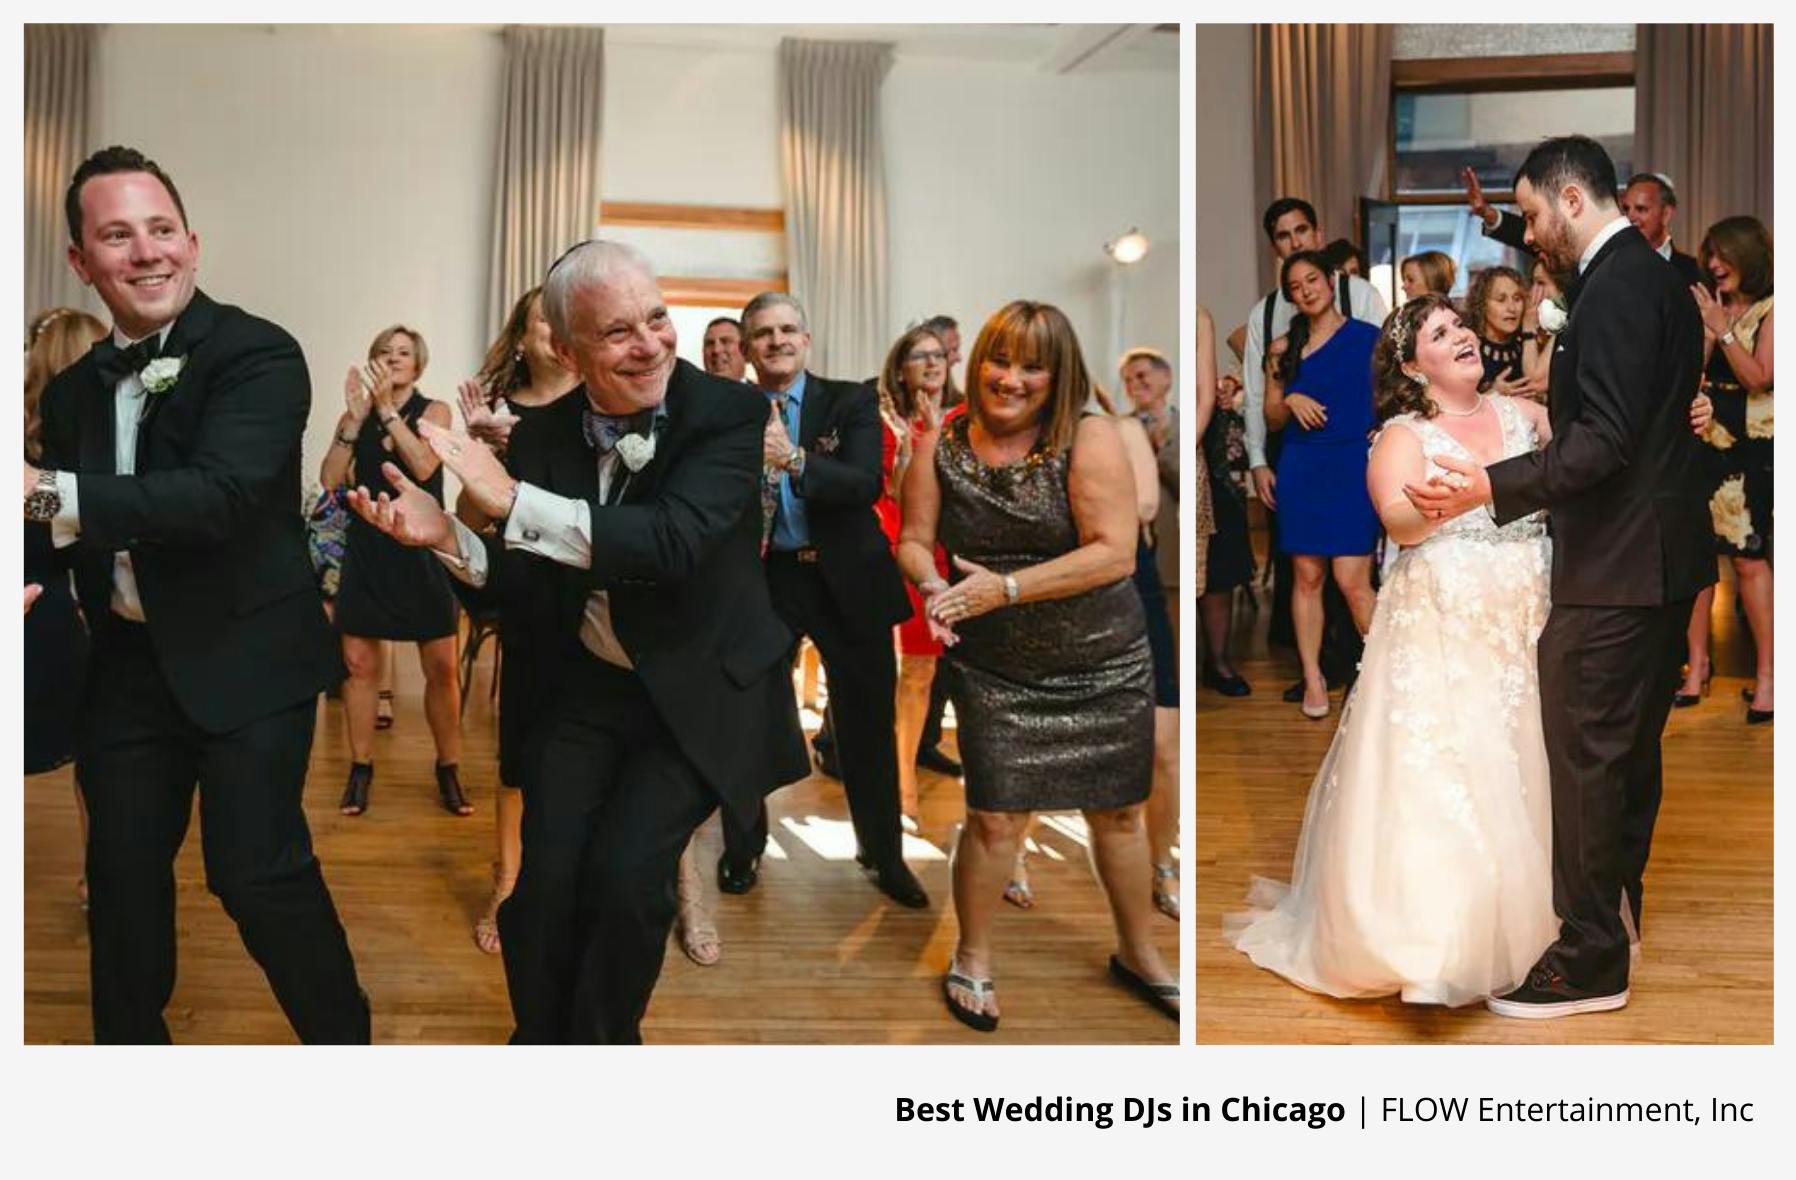 line dance of happy guests on wedding dance floor and couple having first dance to wedding dj entertainment | PartySlate